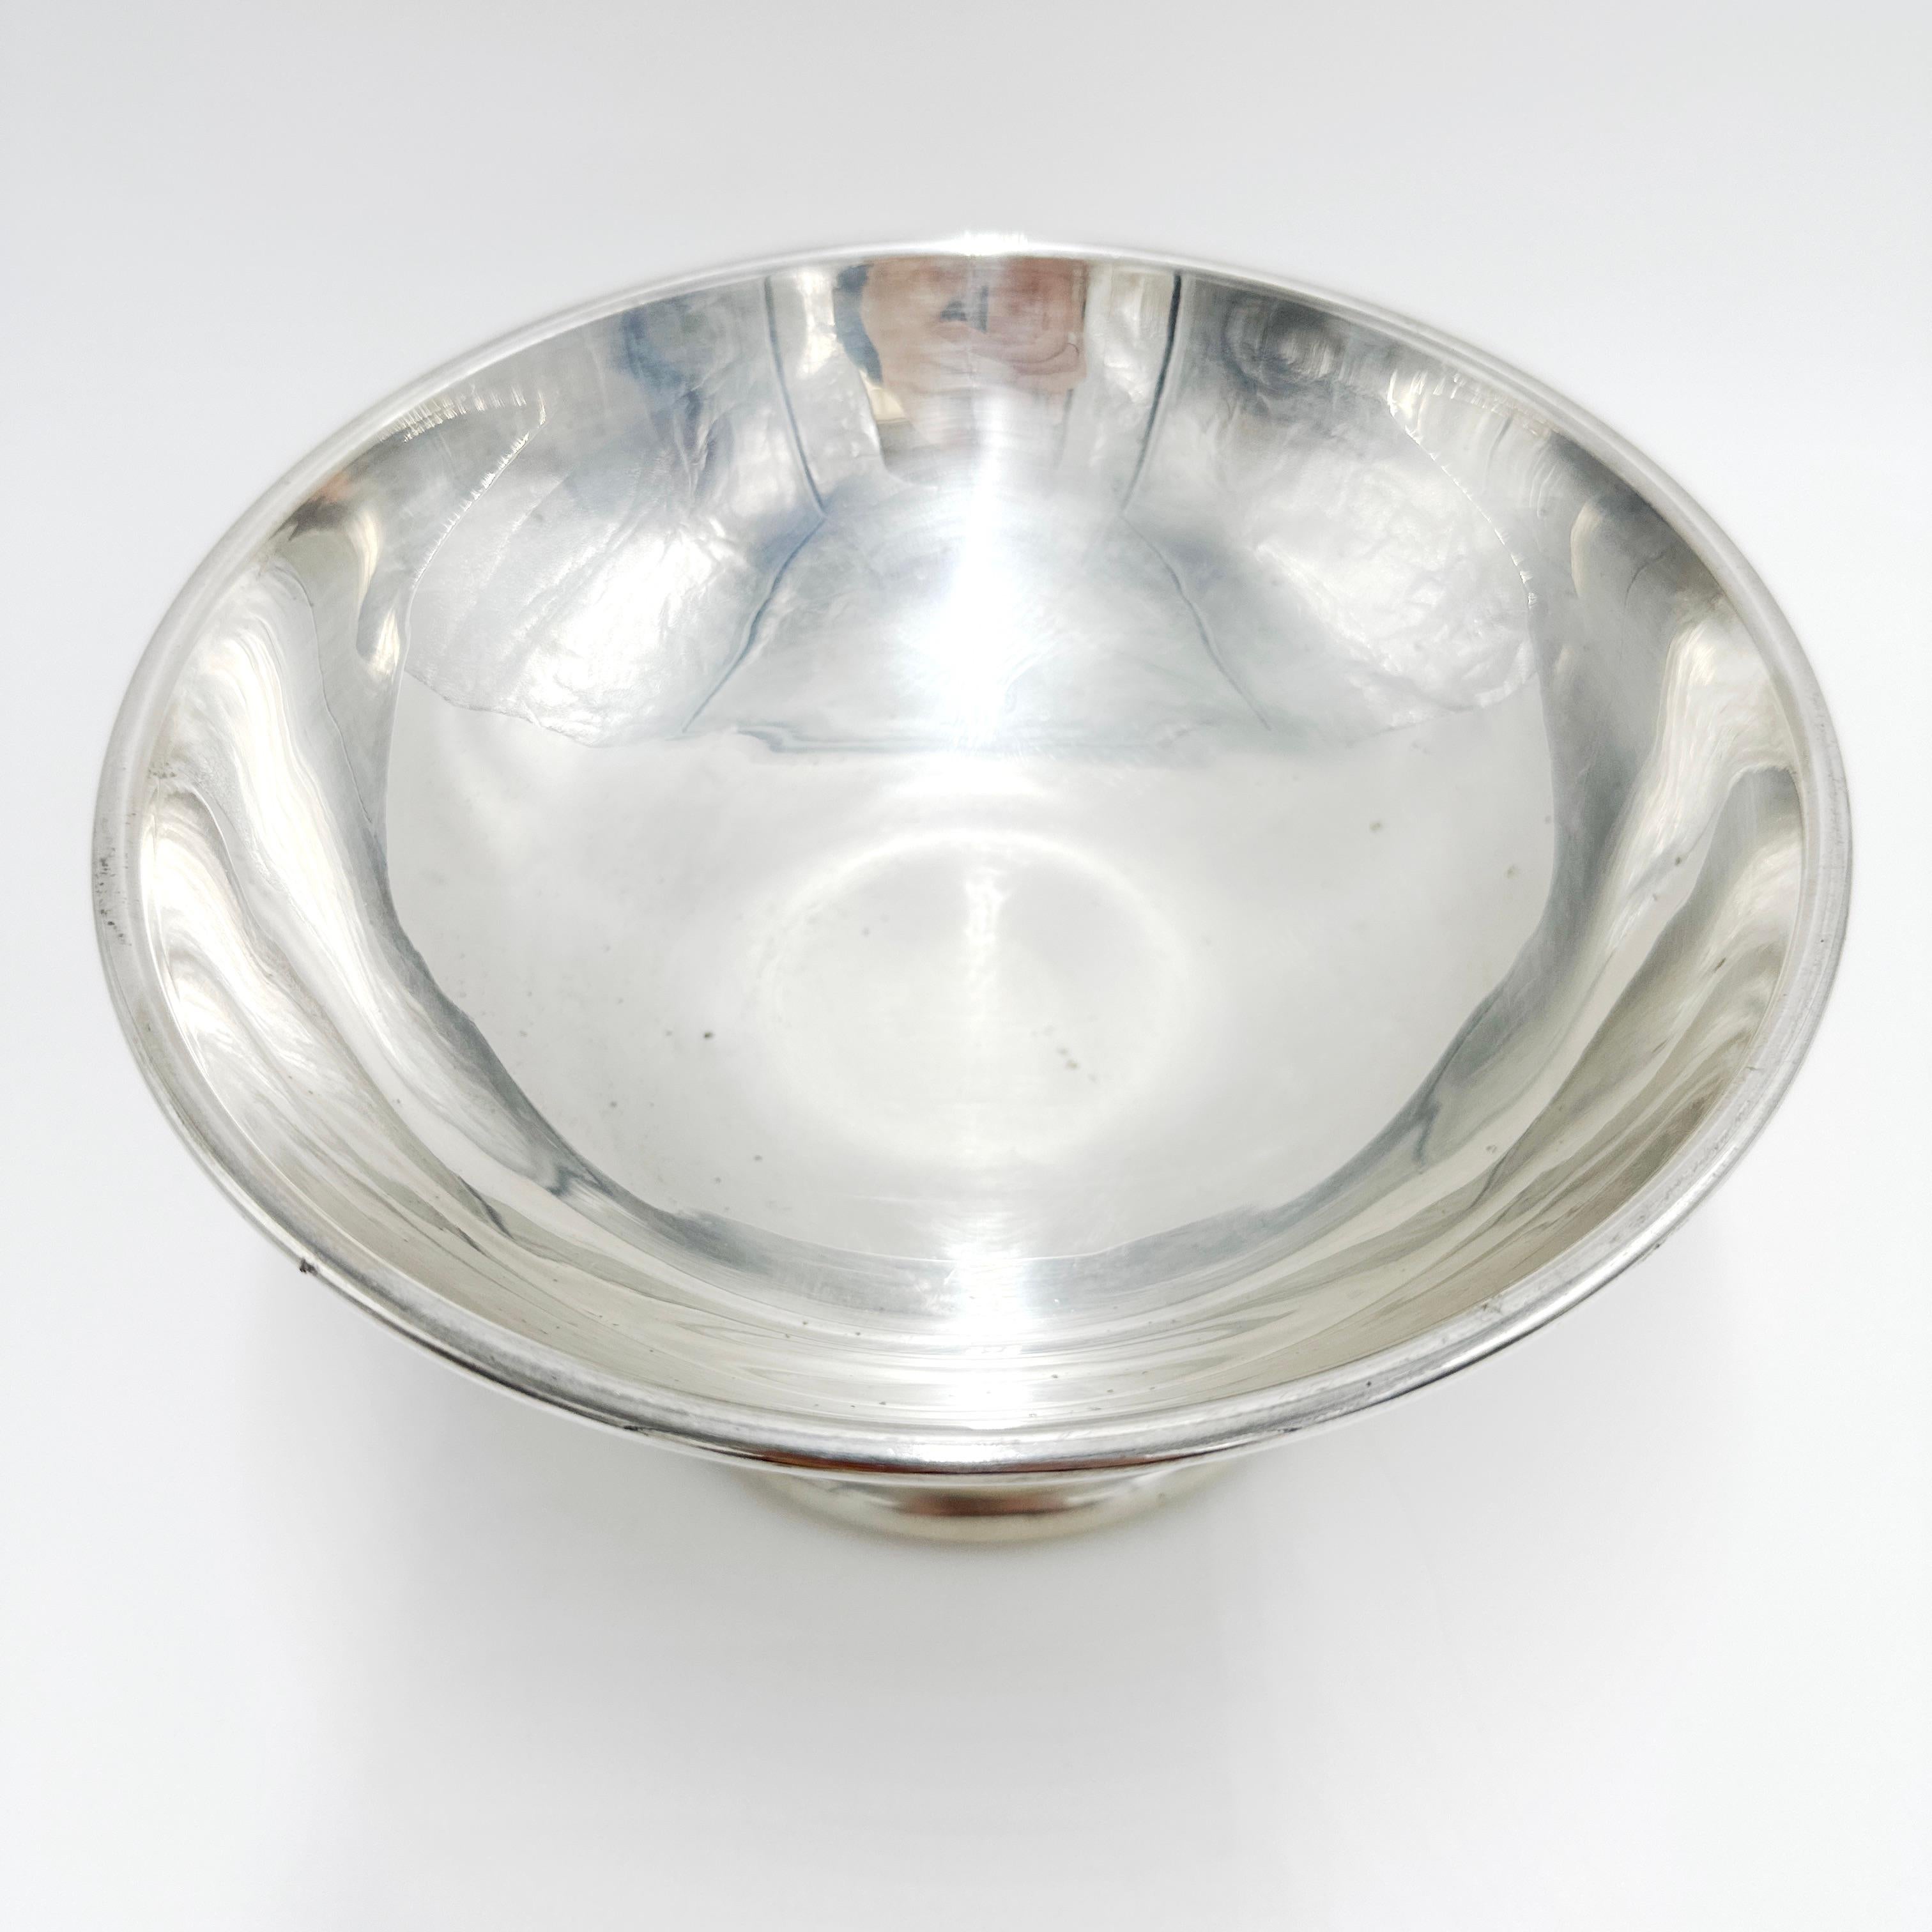 Mid-20th Century Vintage Christian Dior Silver Plated Pedestal Bowl